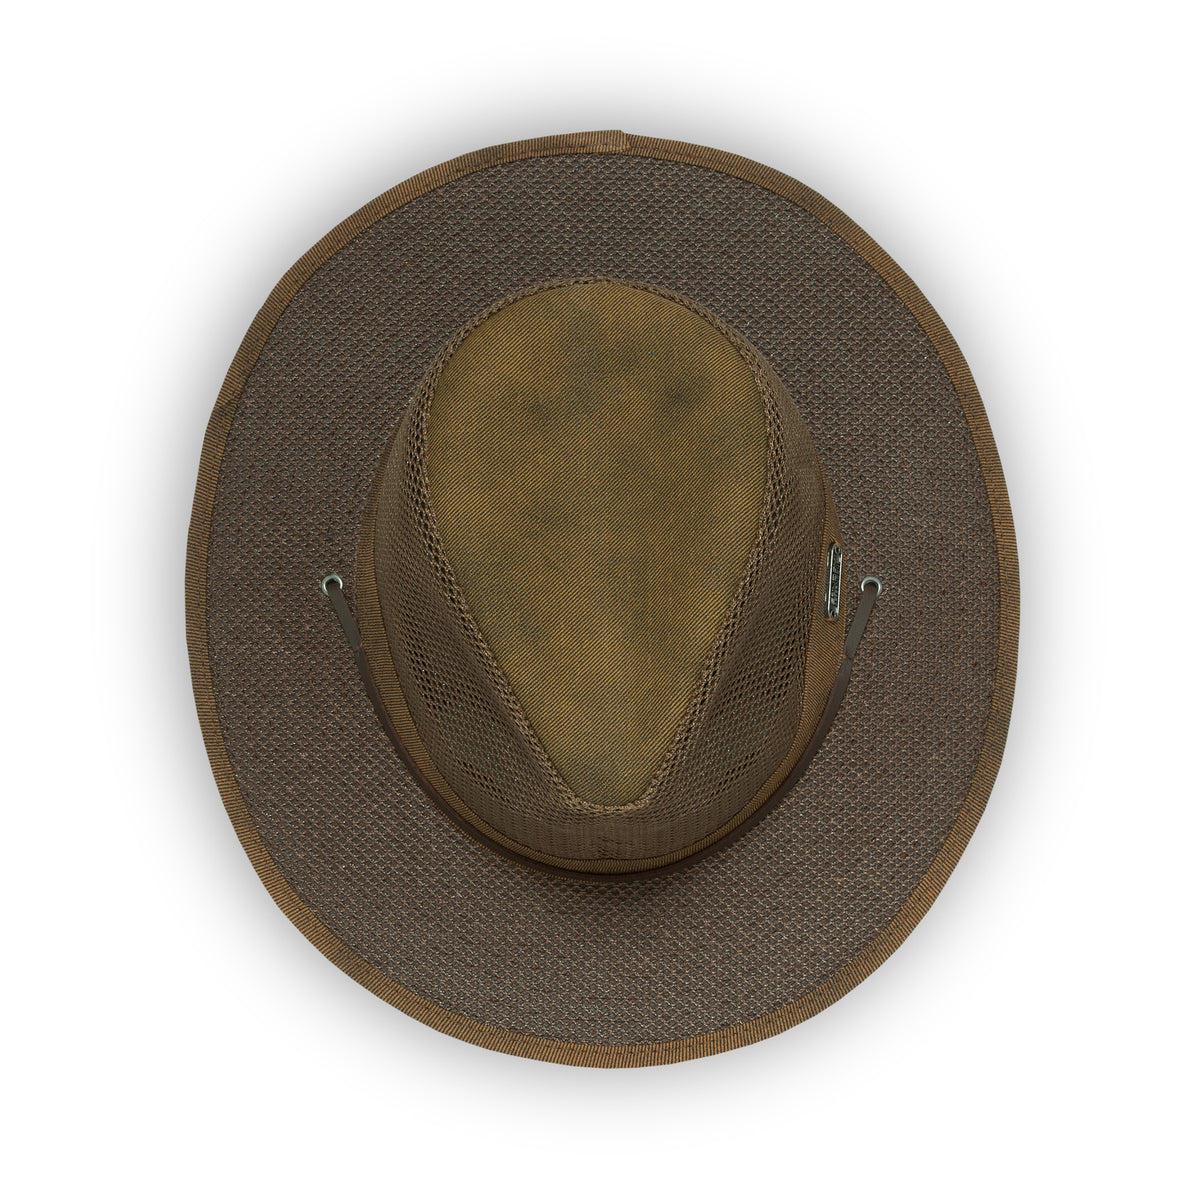 Sunday Afternoons Easybreezer Hat - Tobacco Brown